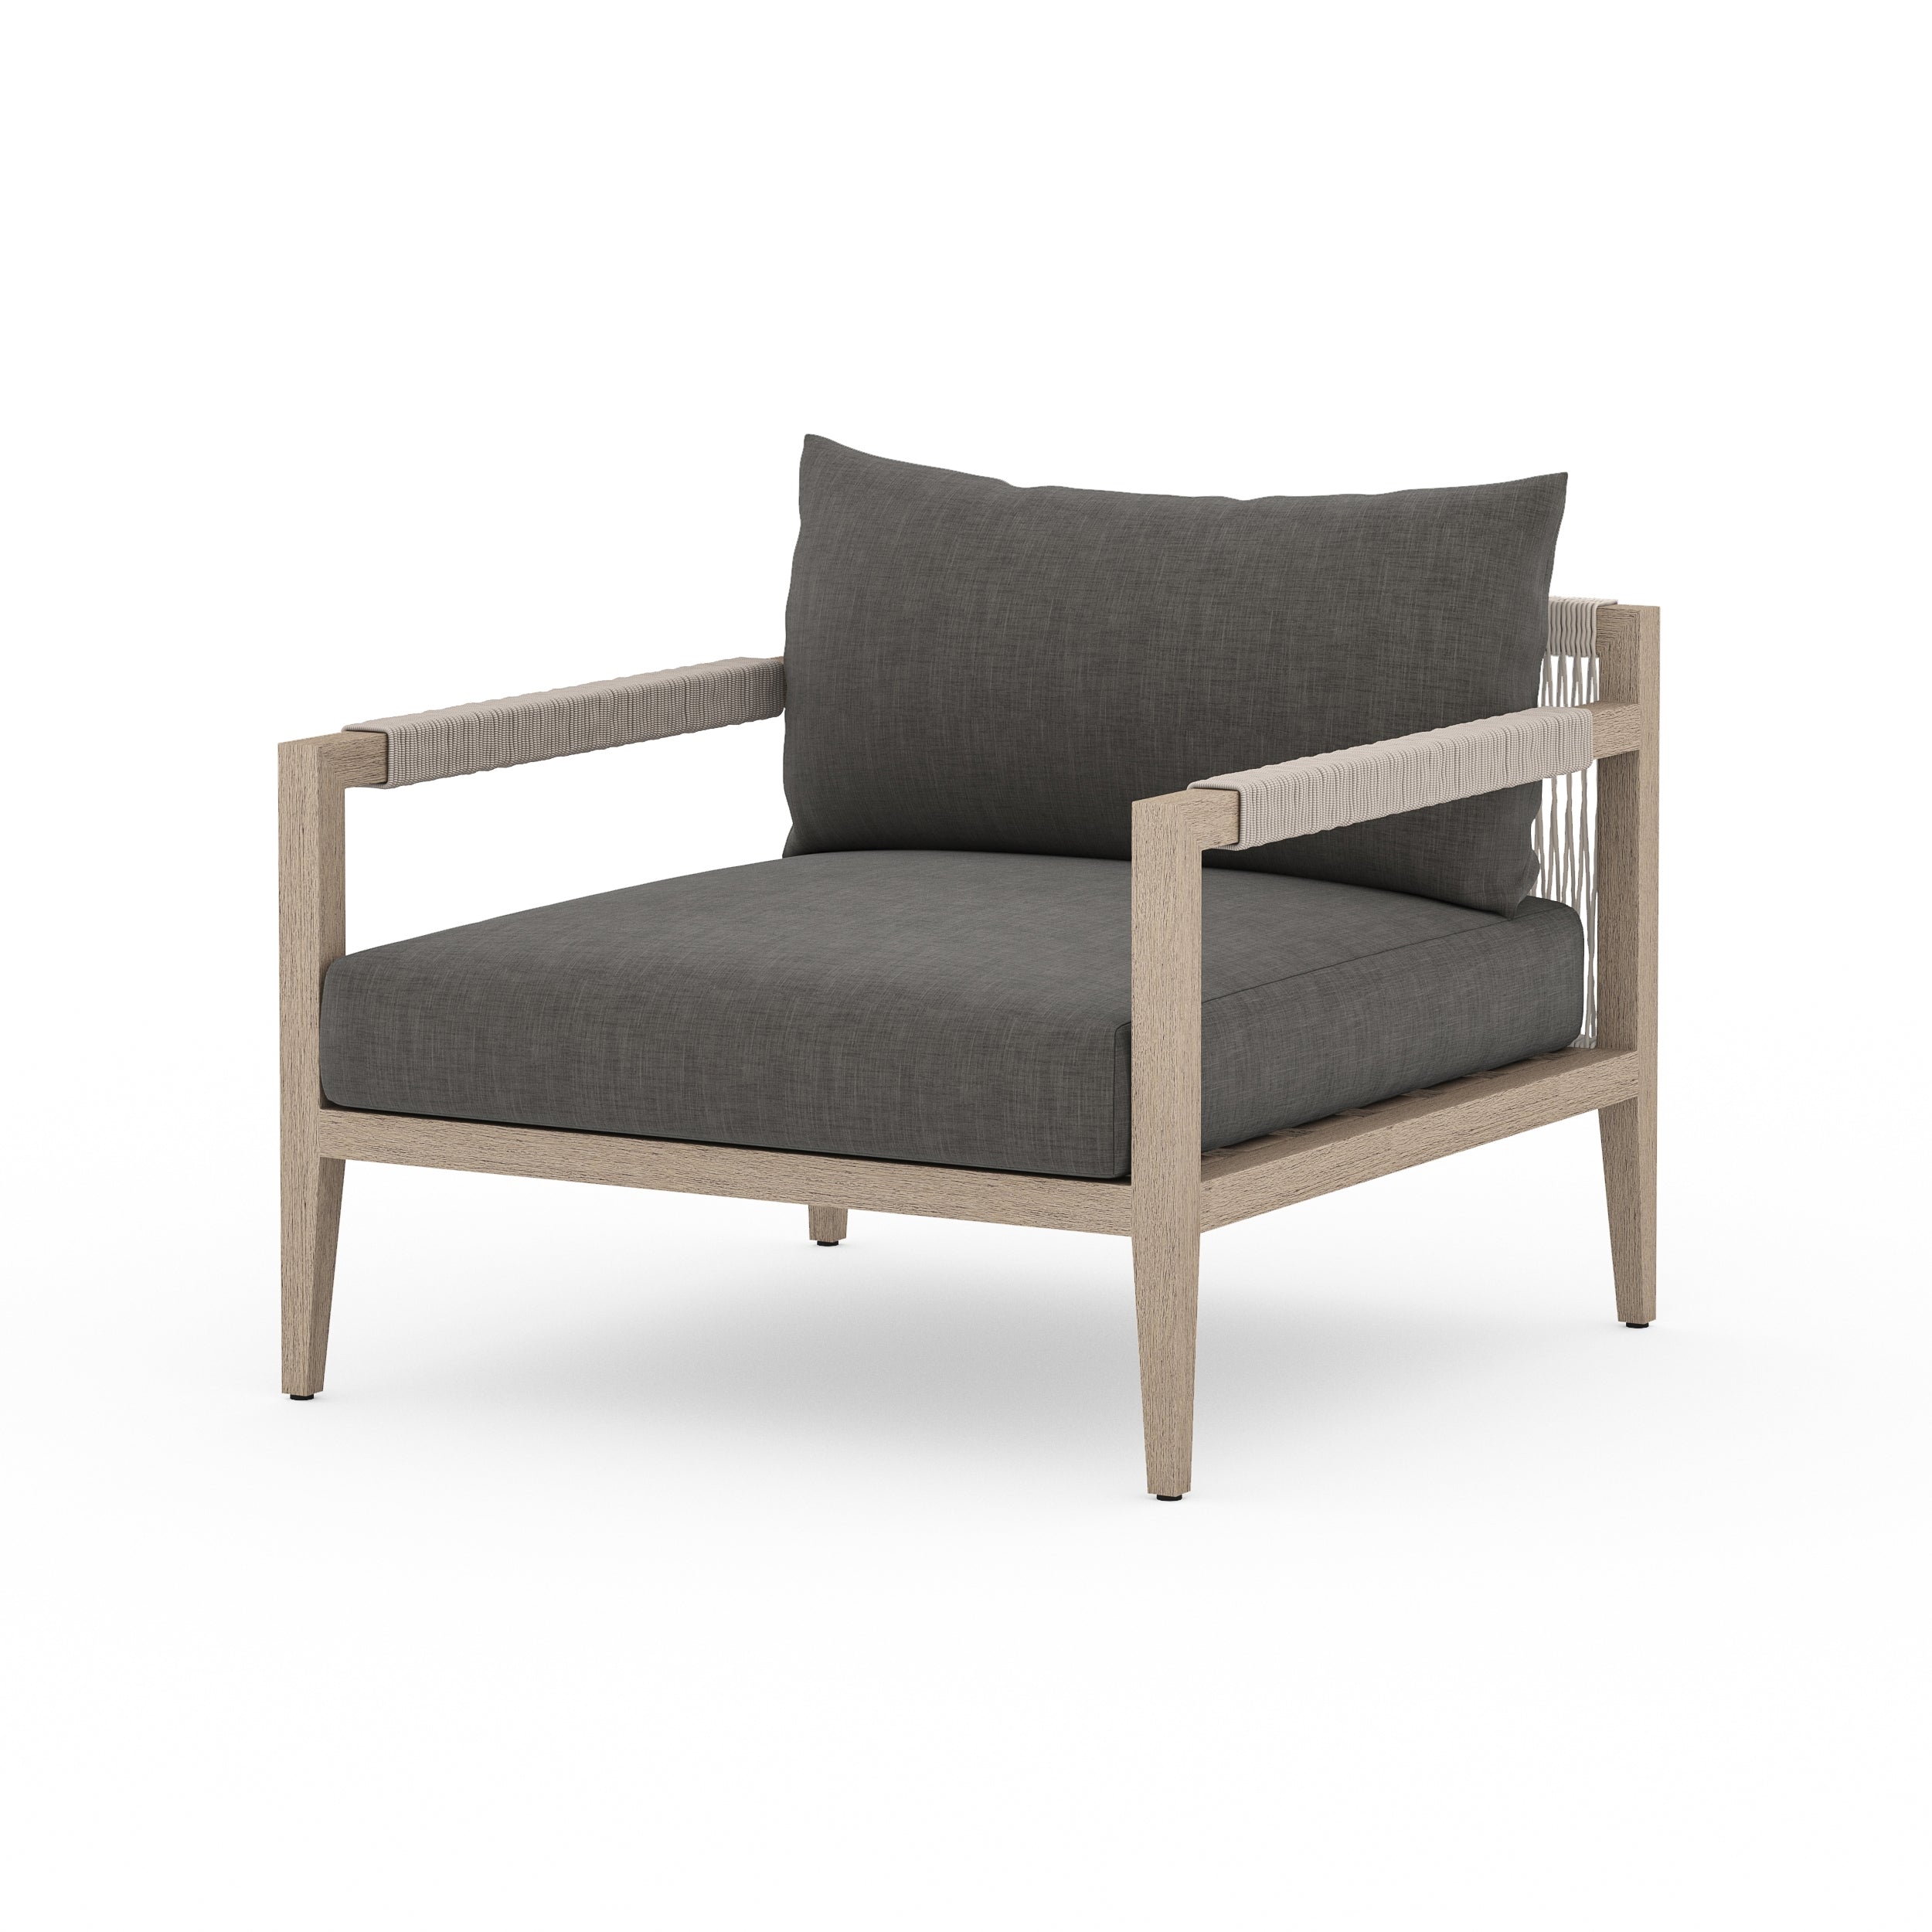 Sherwood Outdoor Chair - Washed Brown